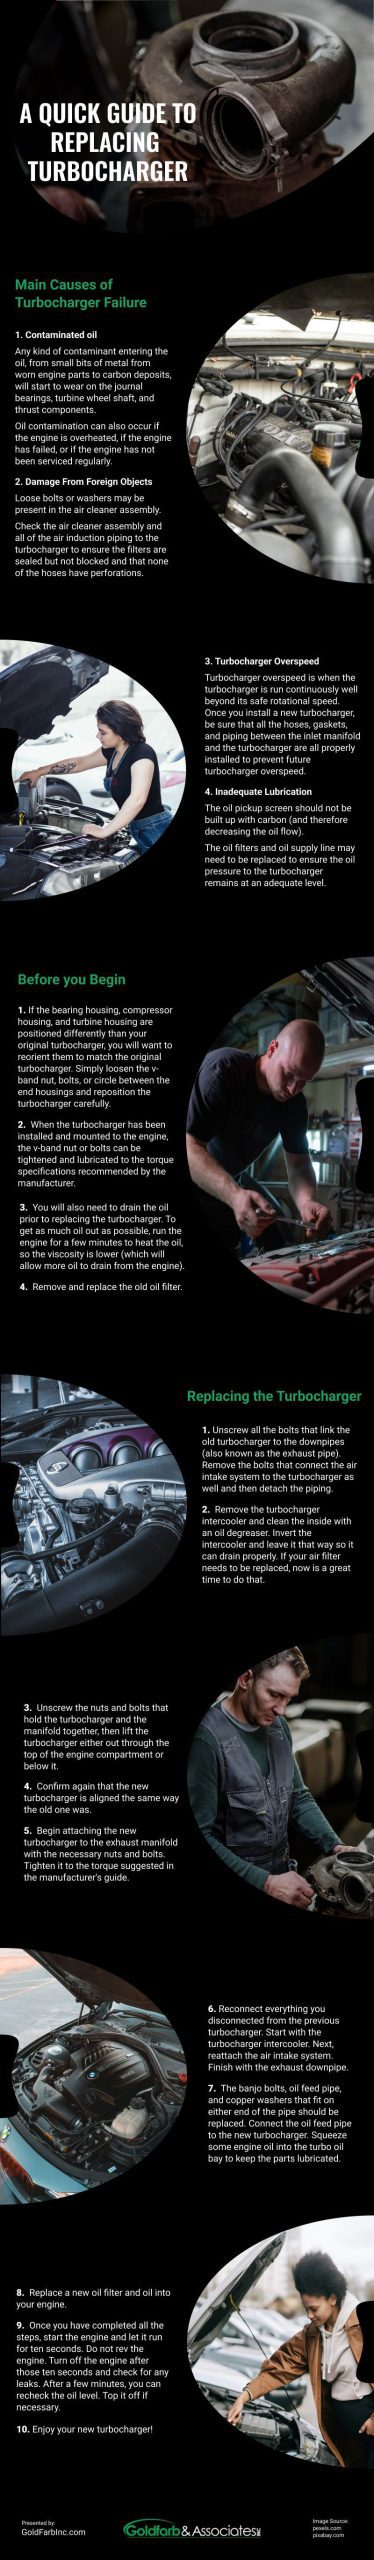 A Quick Guide to Replacing Turbocharger Infographic